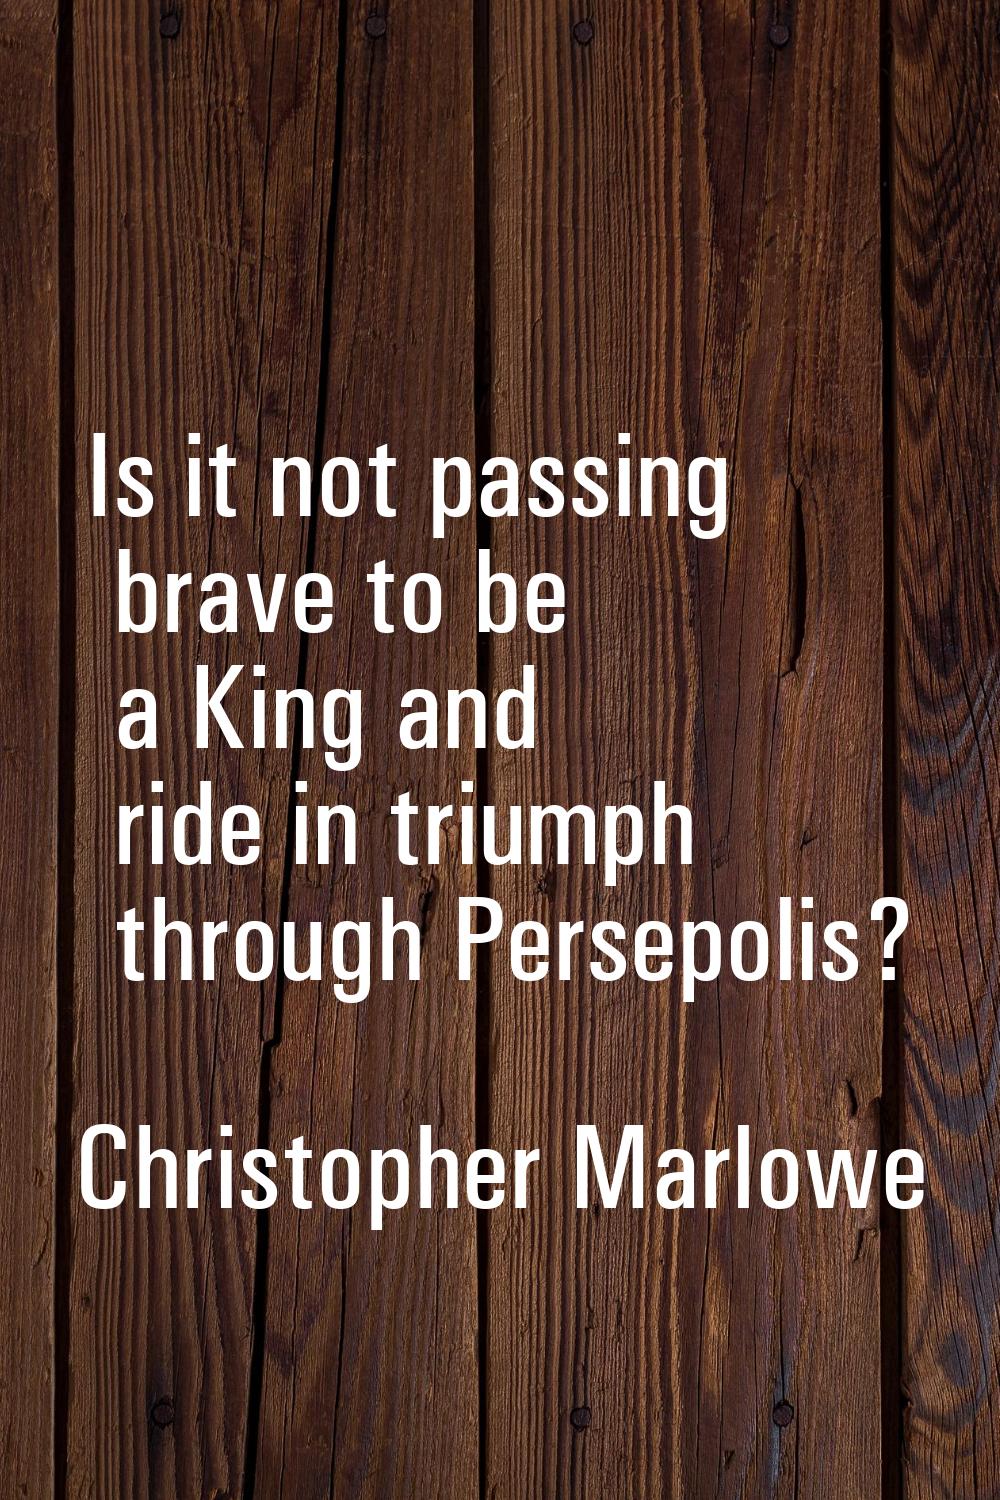 Is it not passing brave to be a King and ride in triumph through Persepolis?